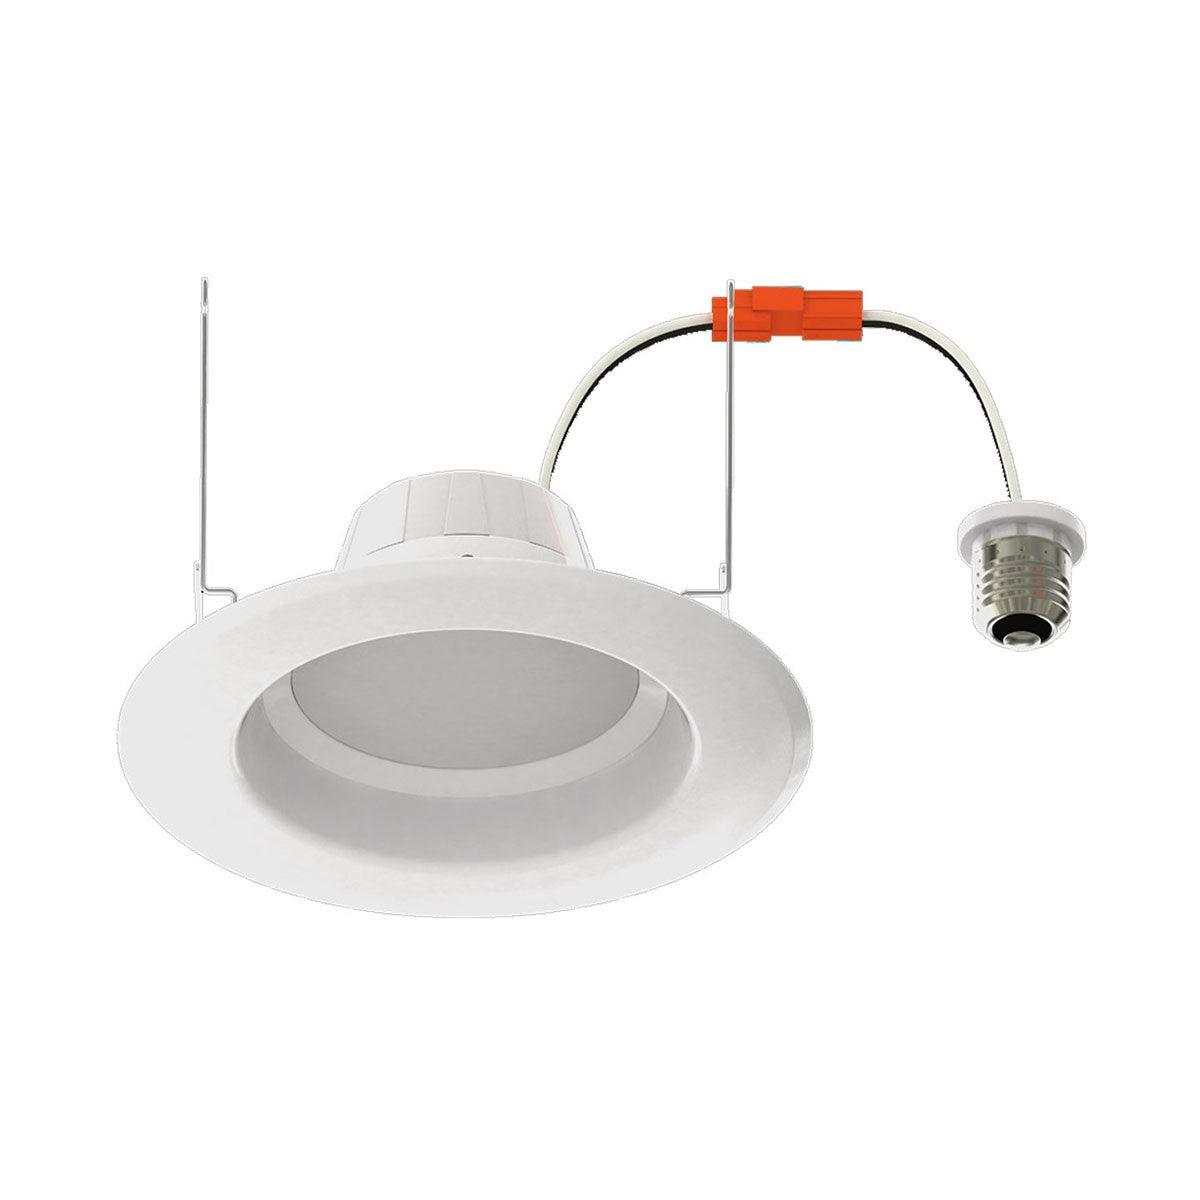 6 In. Aviva Retrofit LED Can Light, Power Select, 1250 Lumens, Selectable CCT, 2700K to 5000K, Smooth Trim